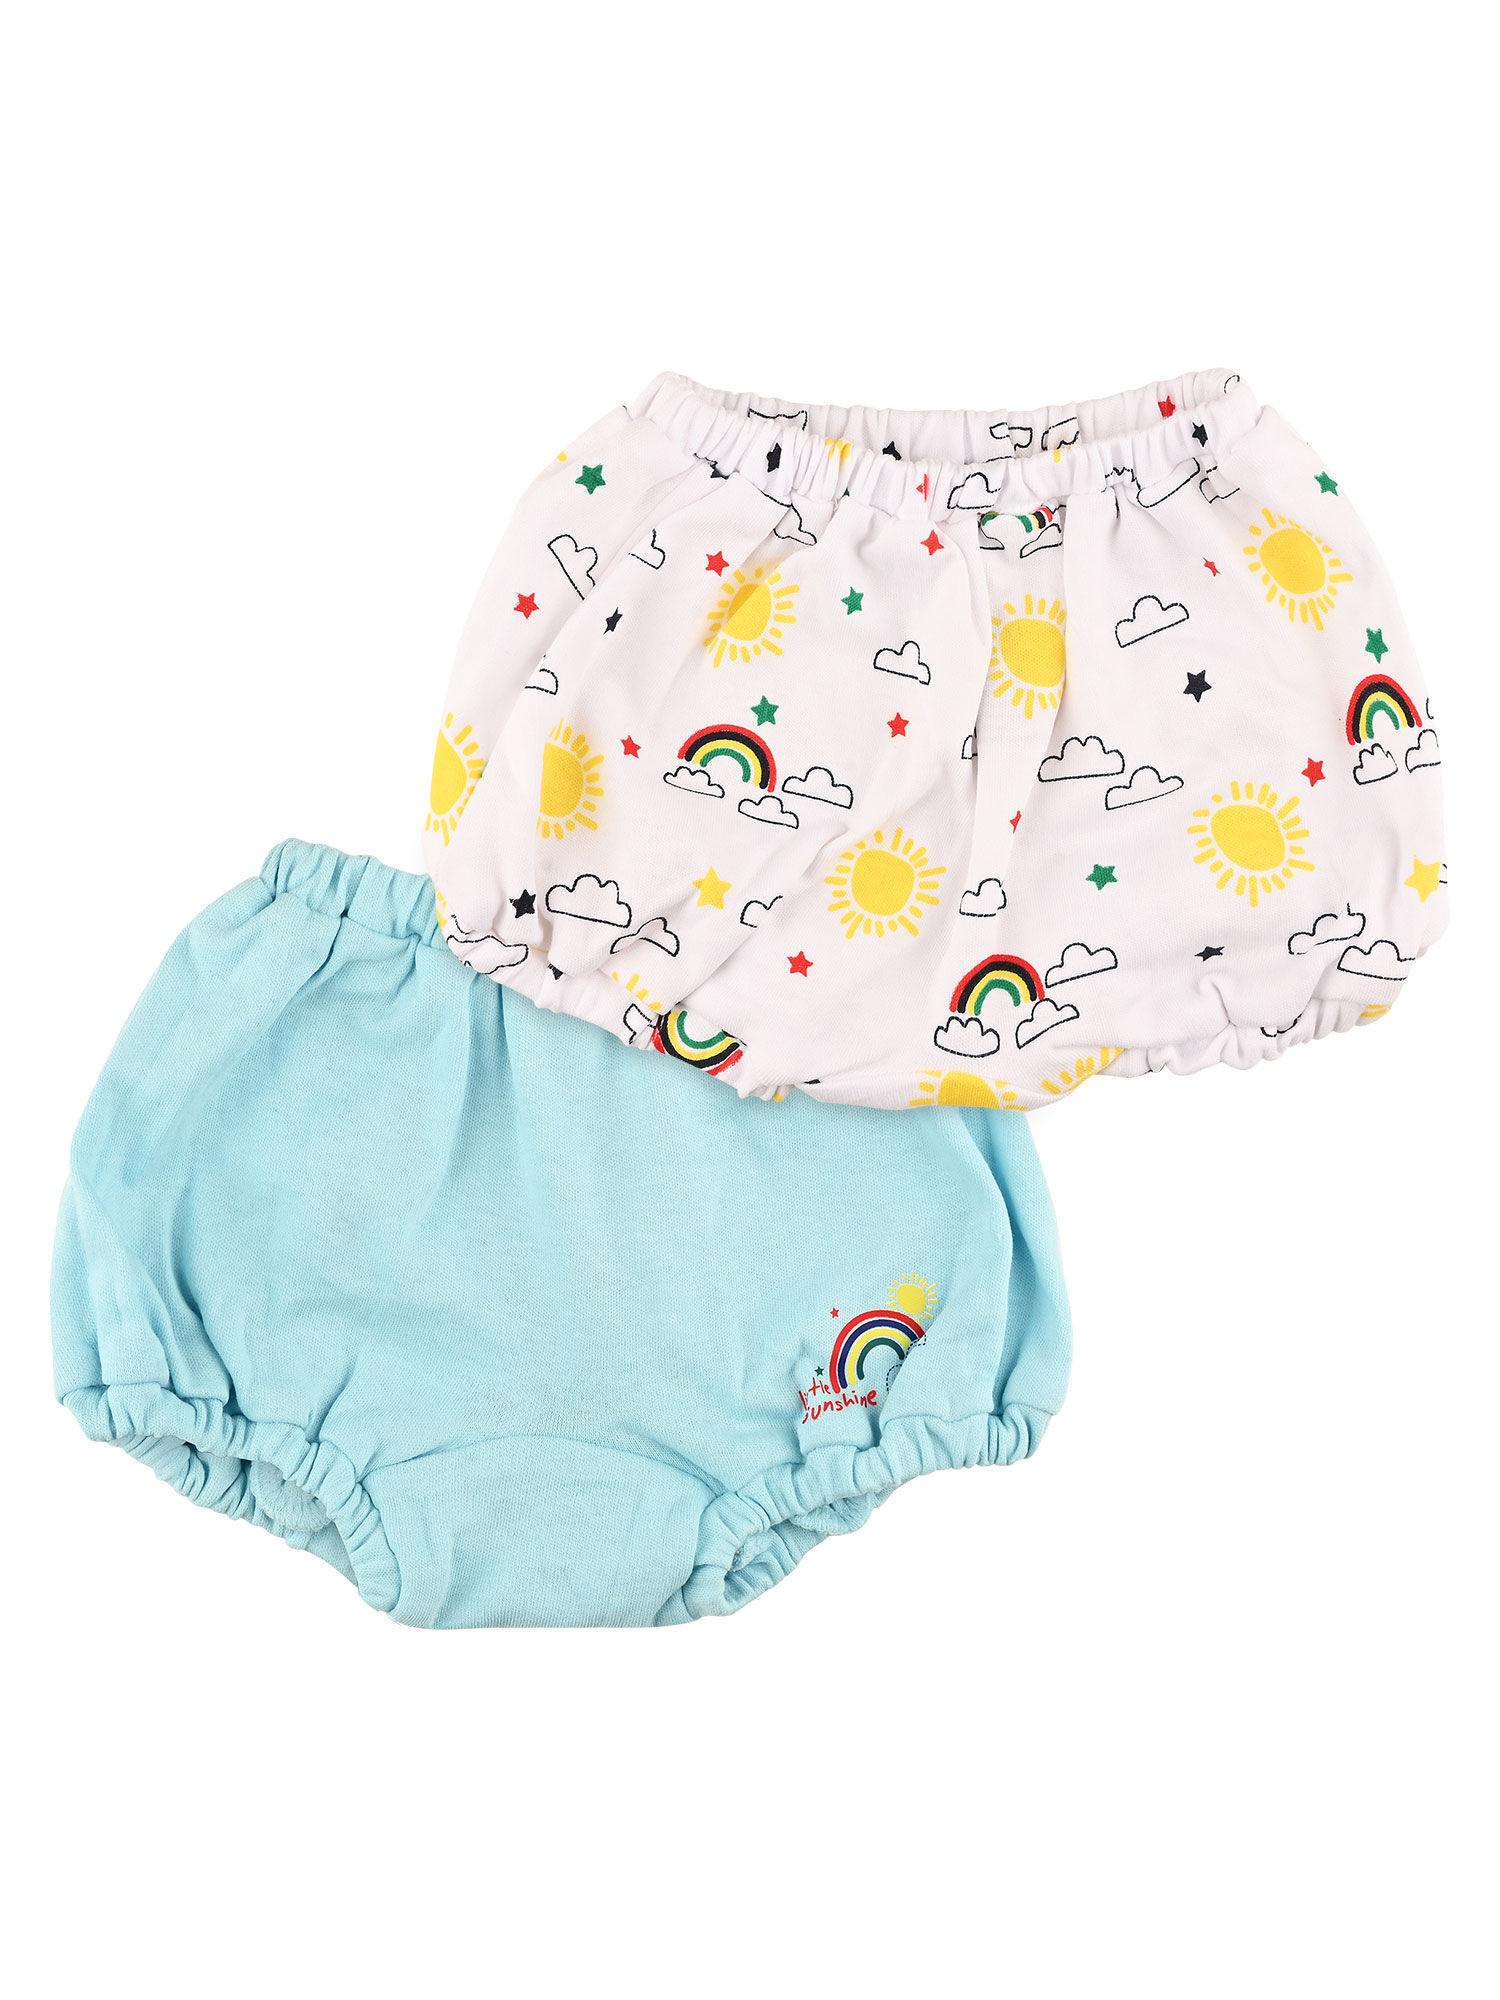 baby-girls-printed-bloomer-brief-underwear-blue-and-white-(pack-of-2)